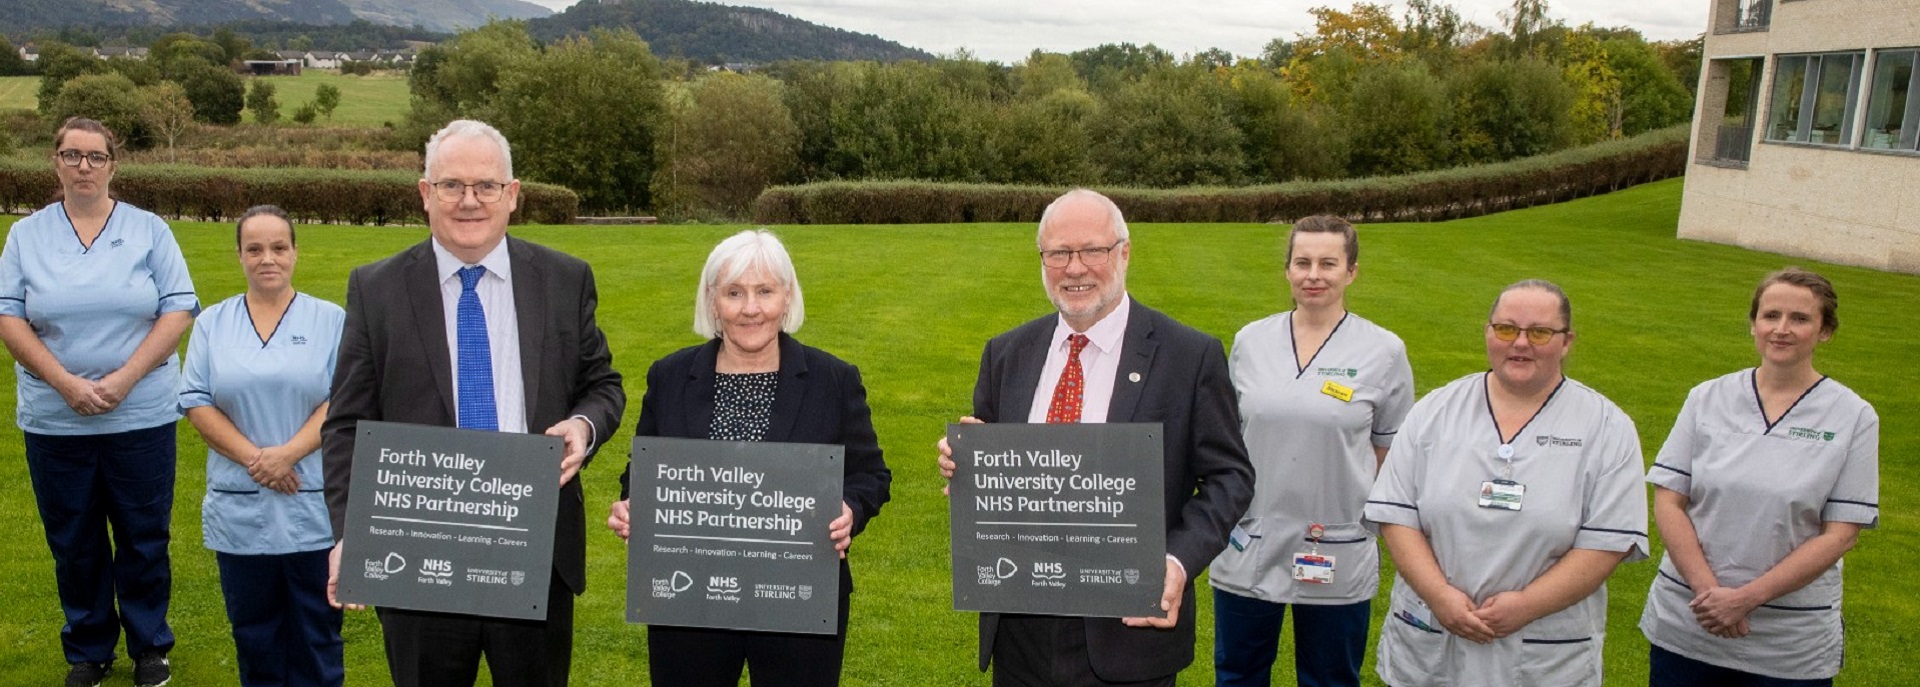 Forth Valley Health Partnership launch